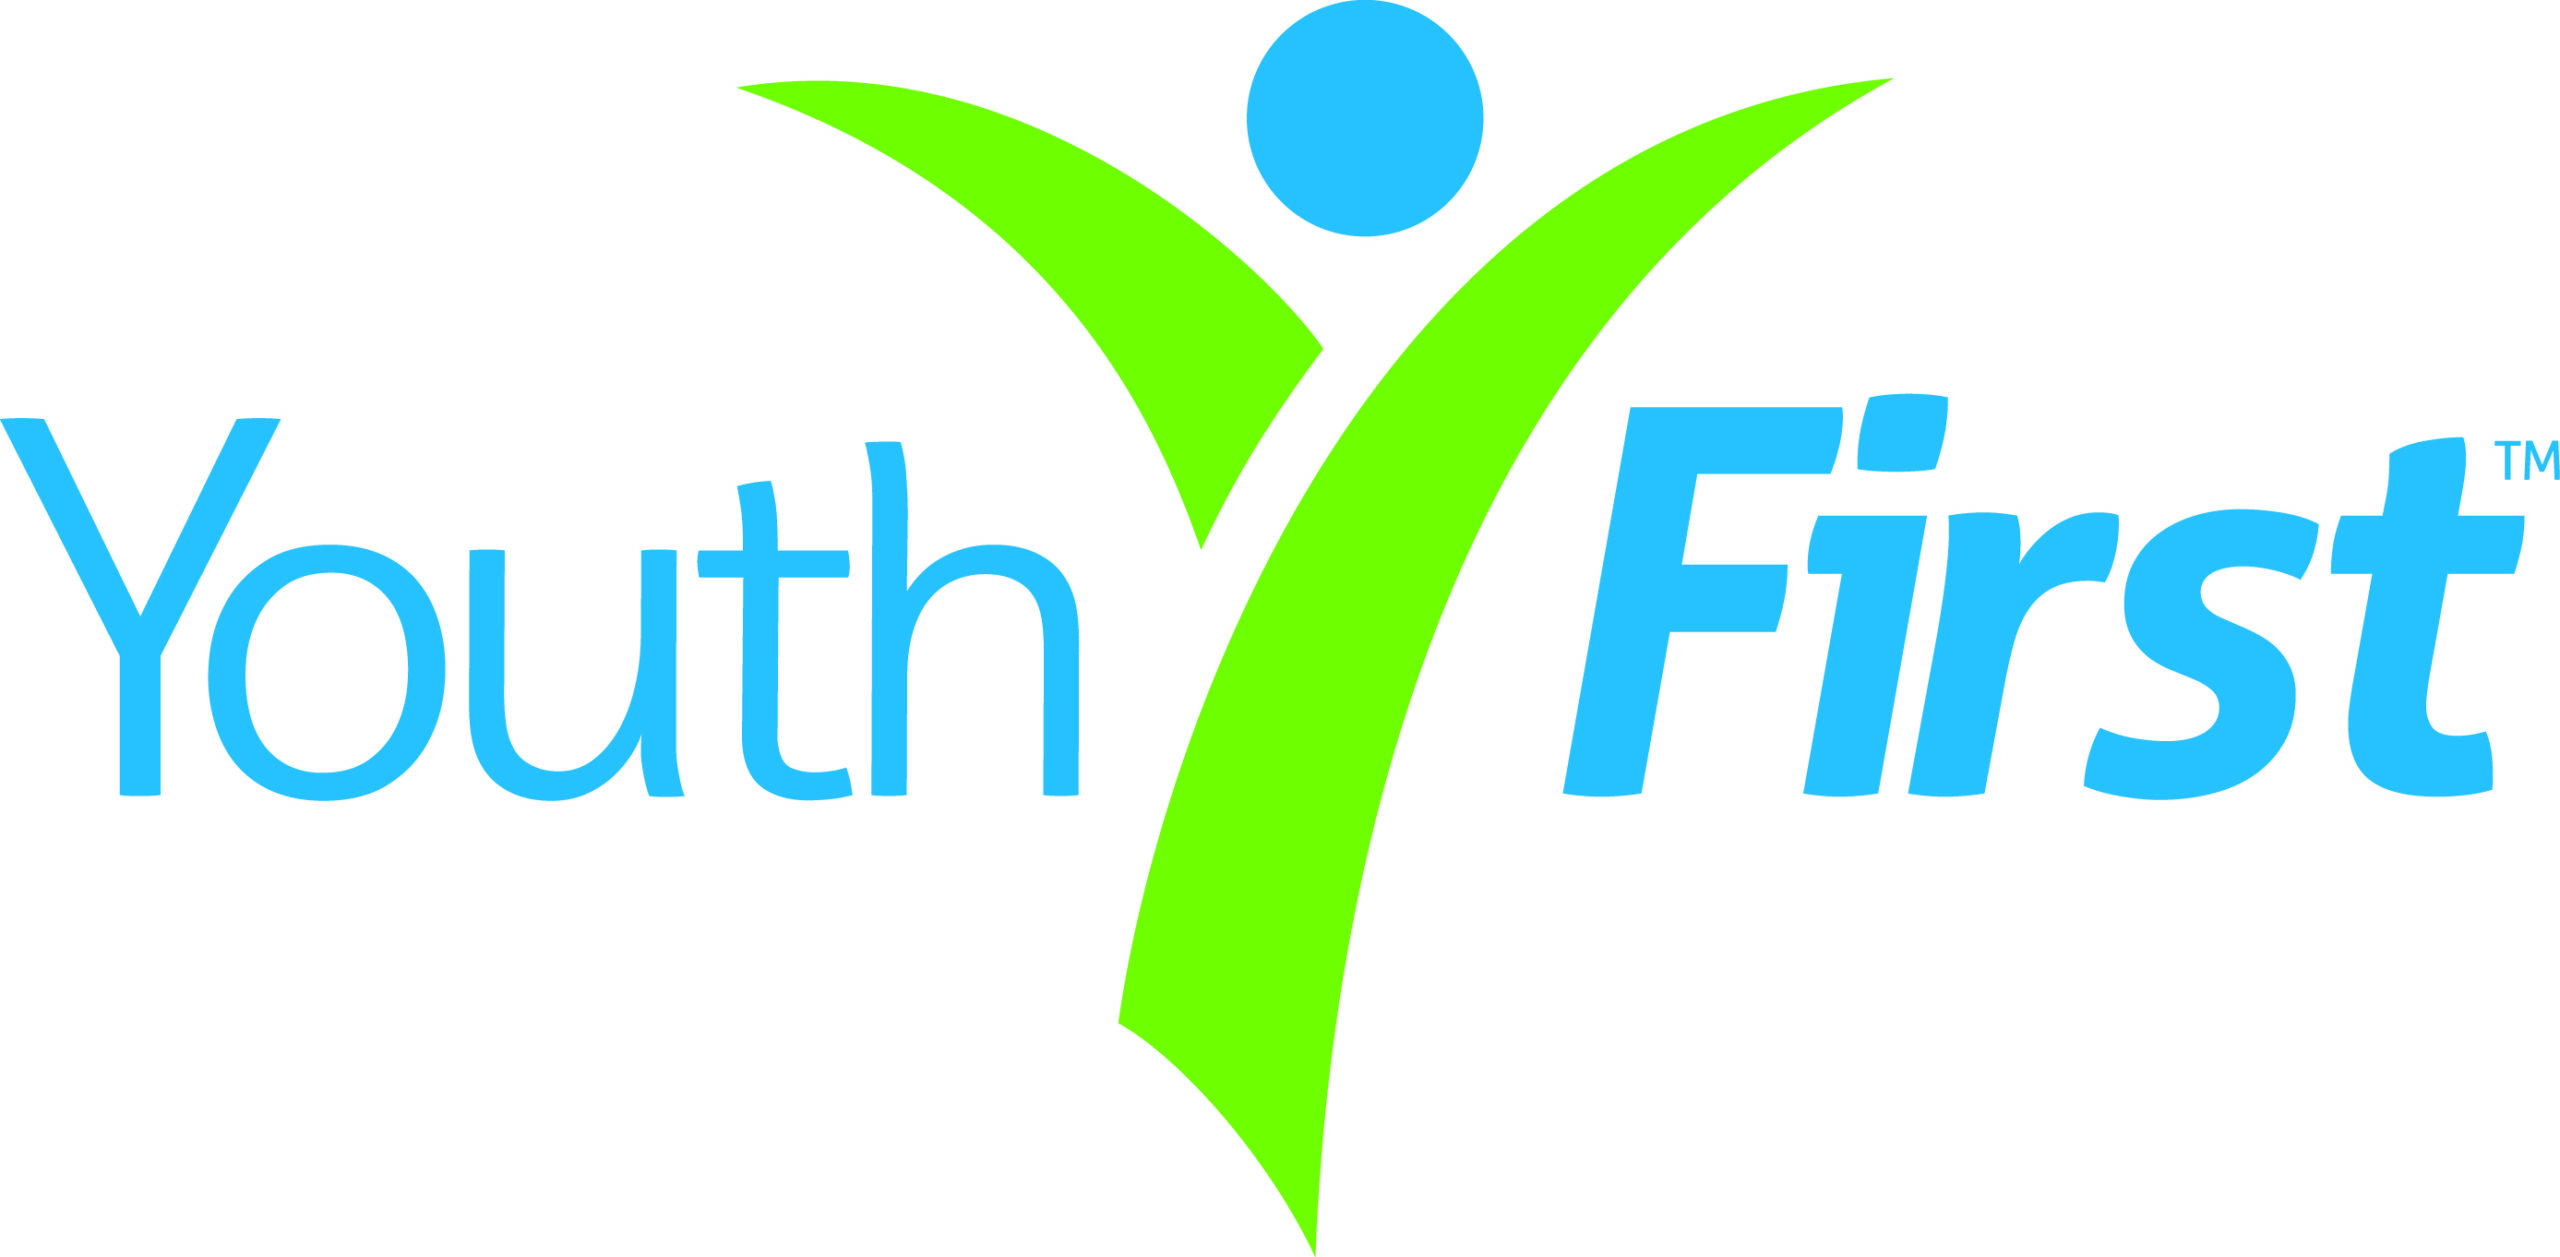 Youth First, Inc.